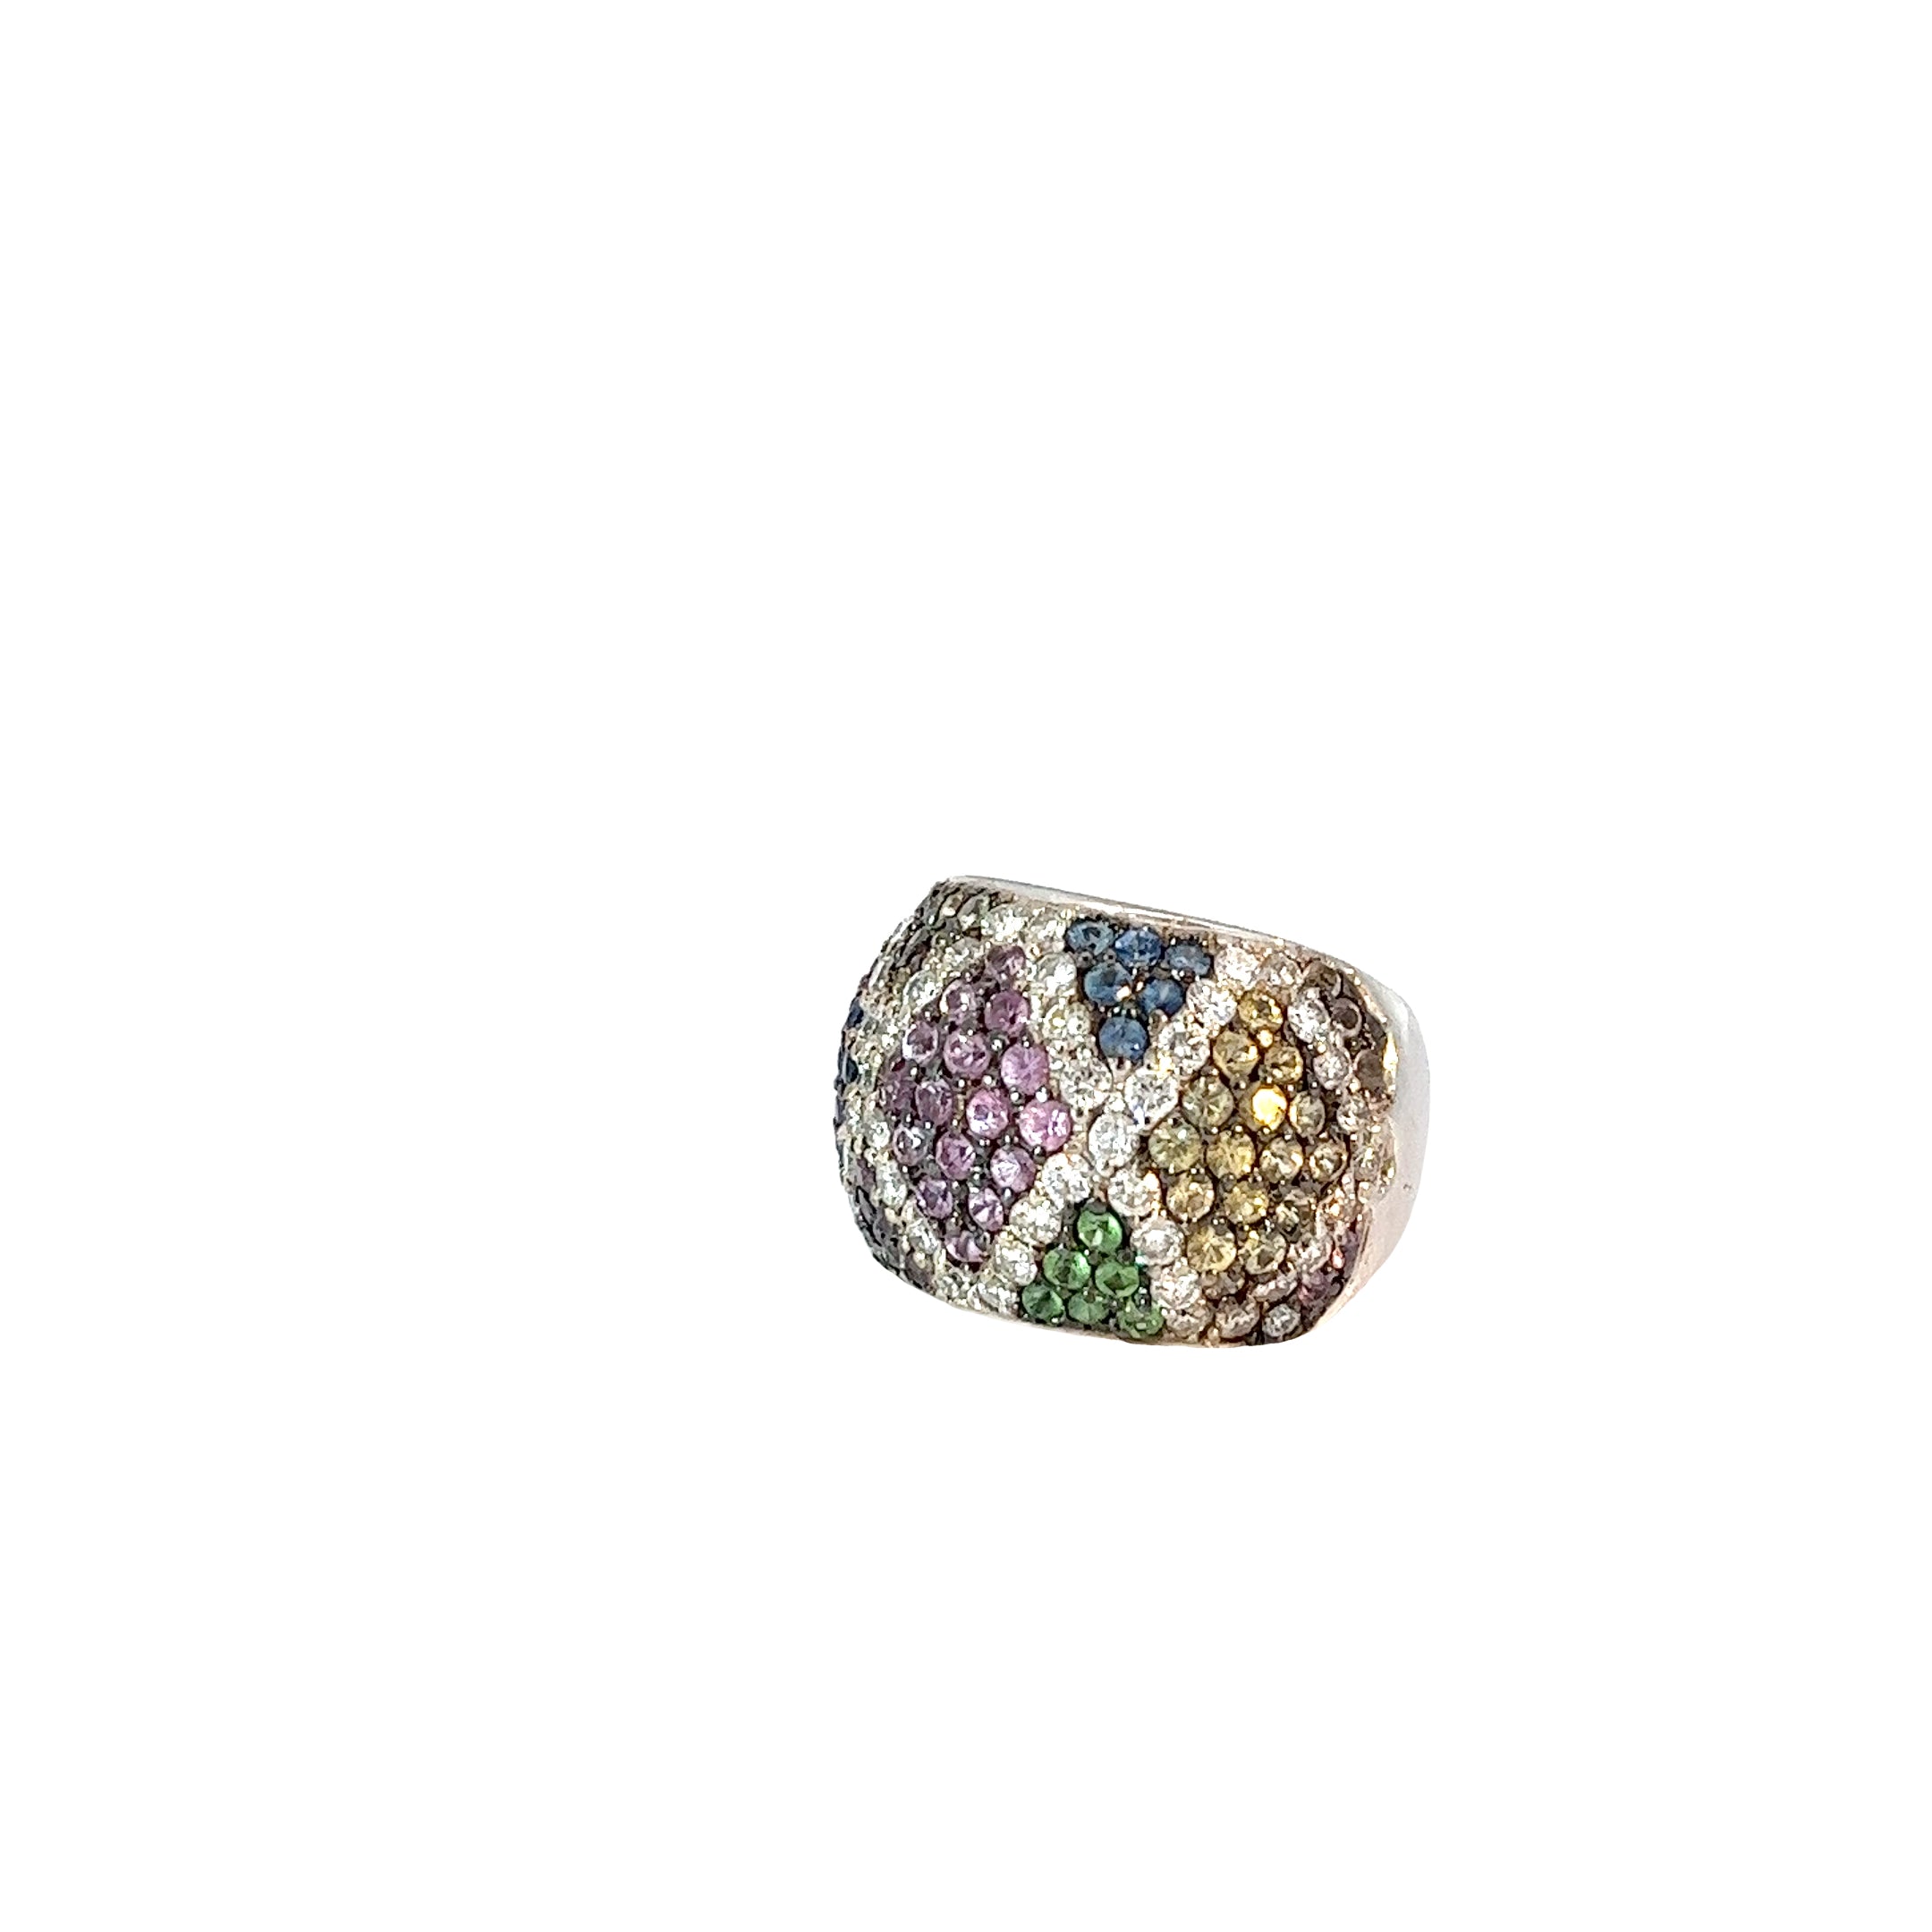 Ladies 18k White Gold Multi-colored Sapphire and Diamond Ring